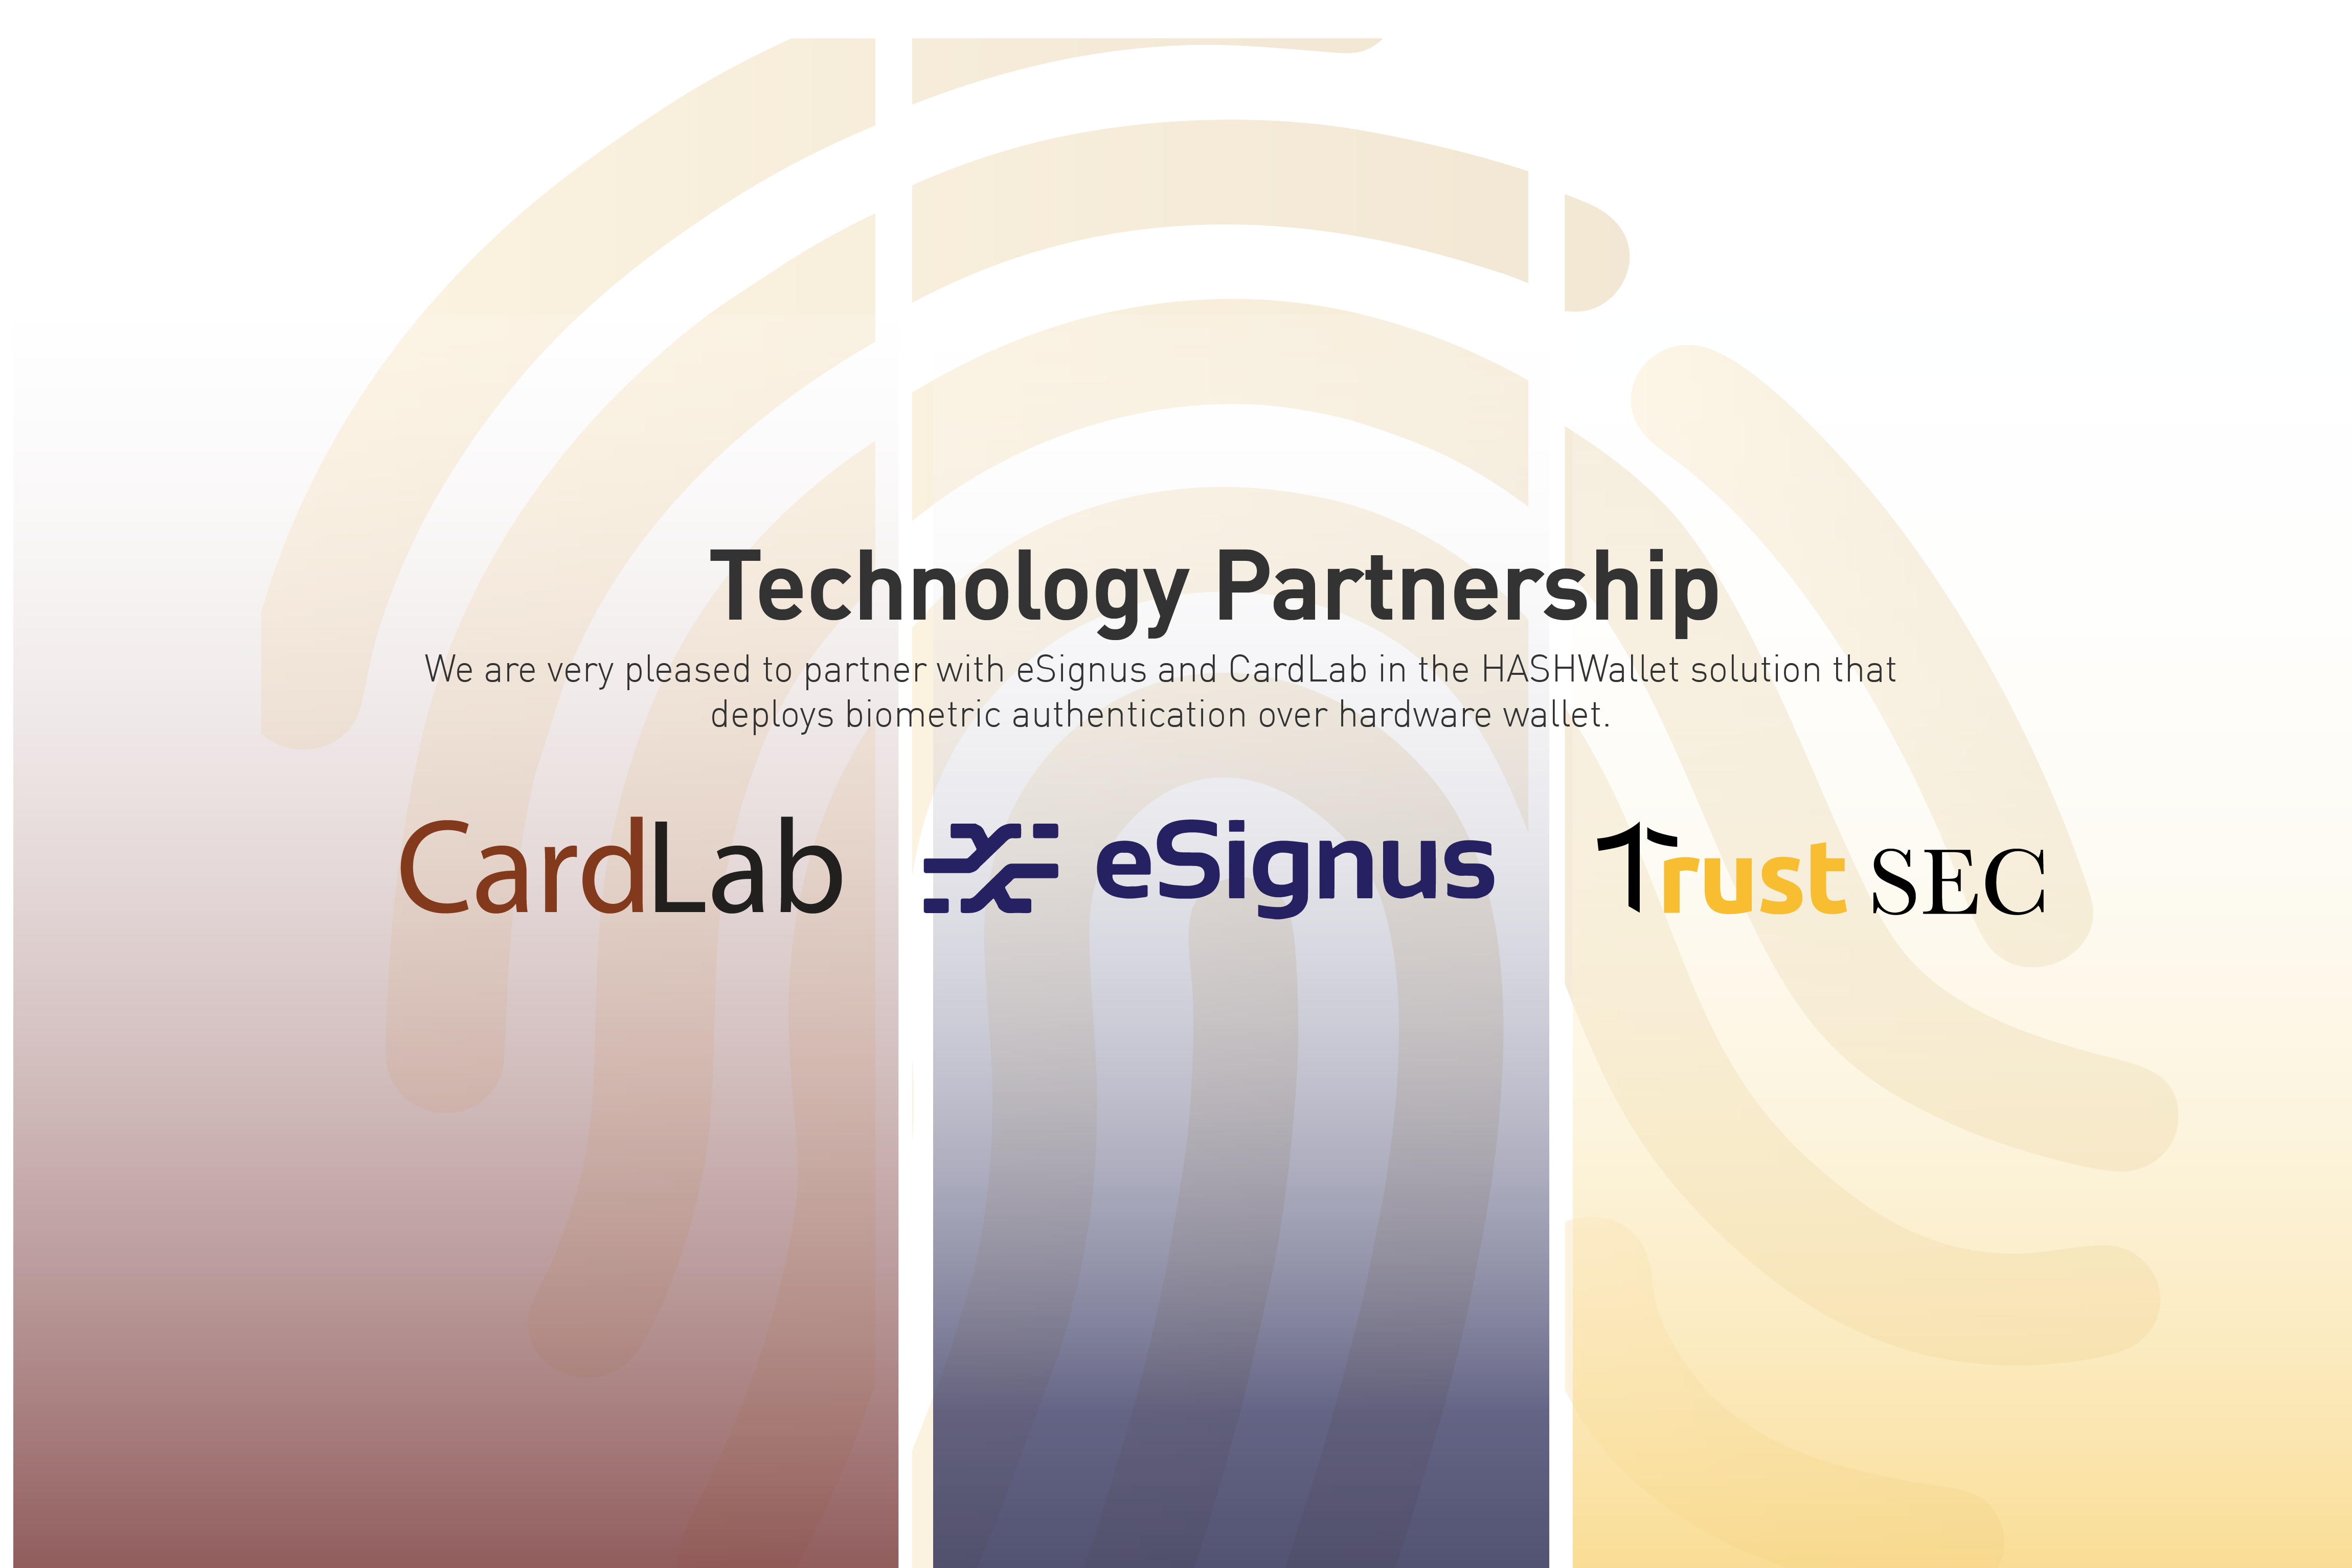 CardLab's new partnership could result in a more secure hardware